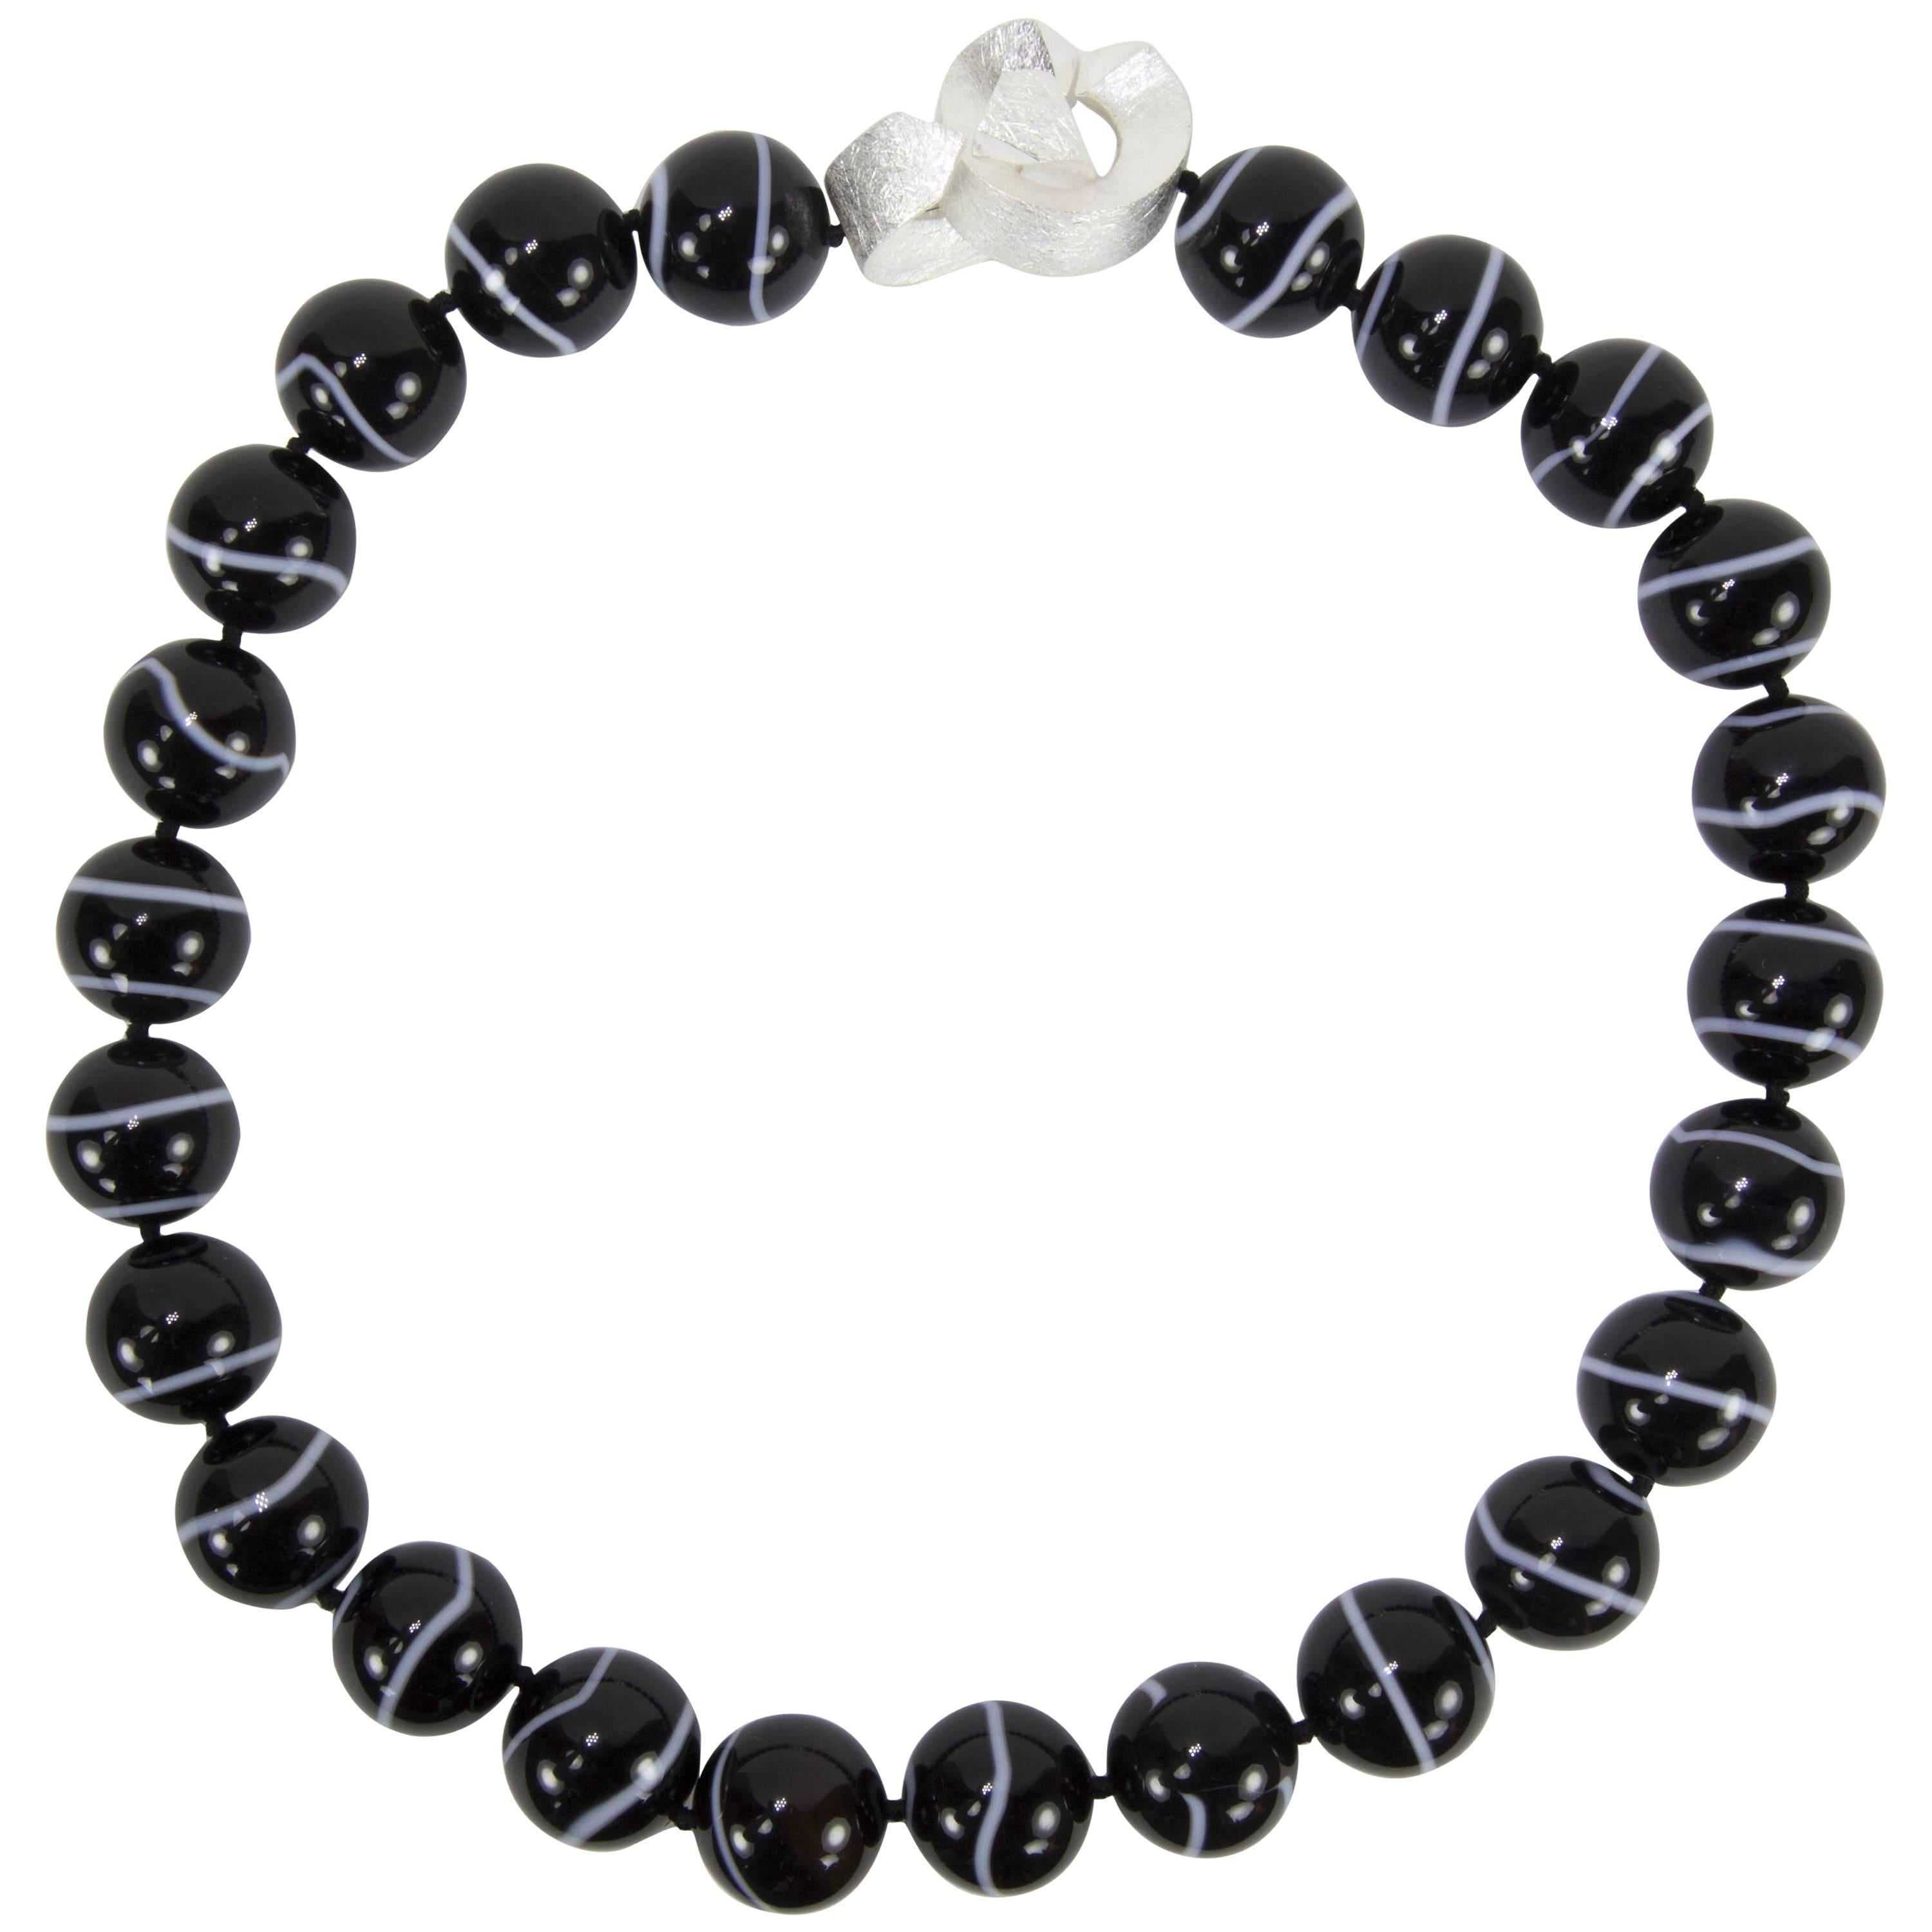 Beautiful Large Black Banded Agate Bead Statement Necklace